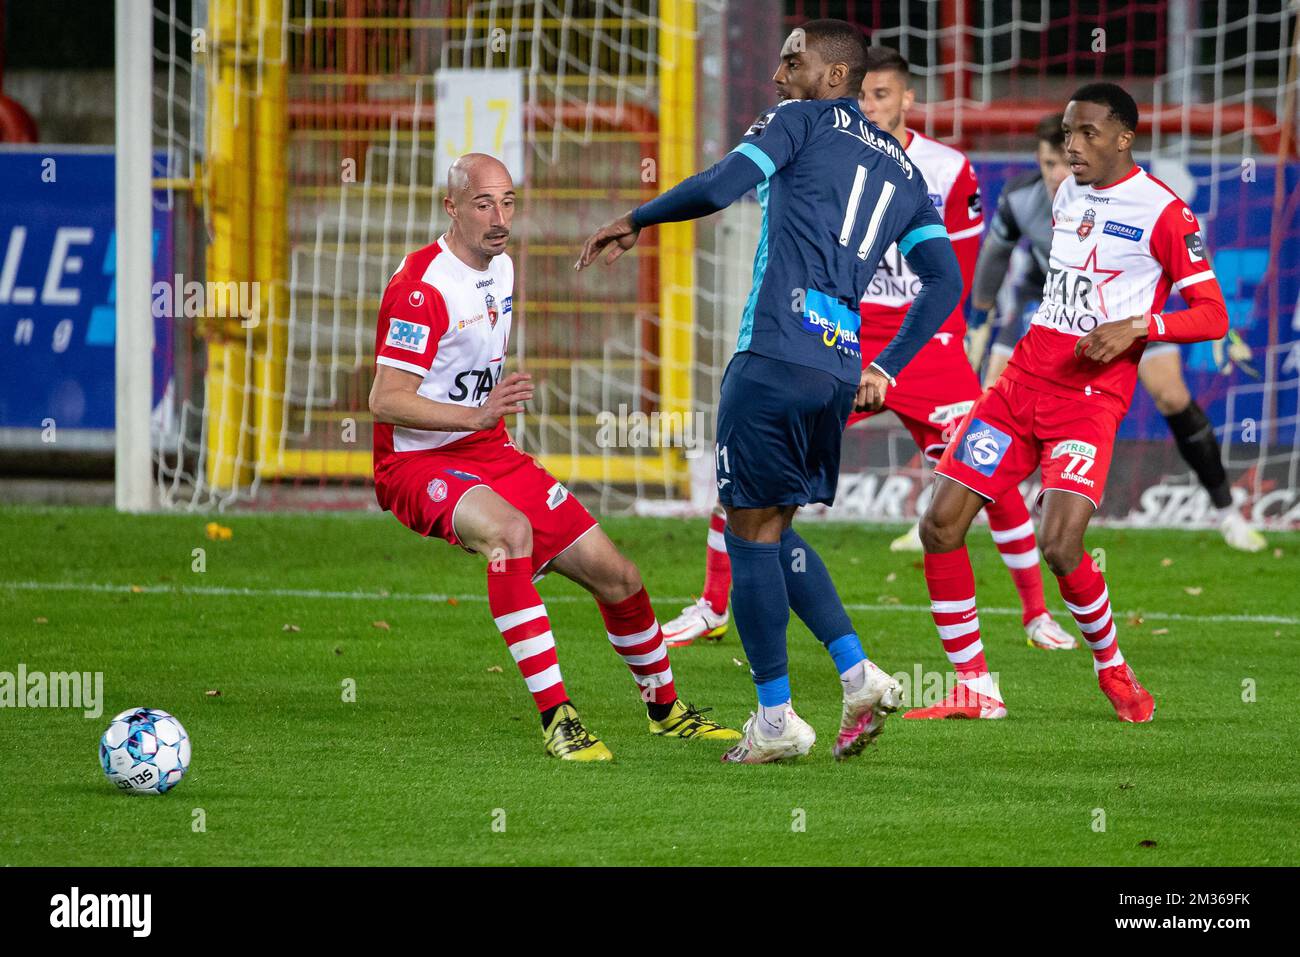 Mouscron's Christophe Lepoint and Rwdm's Thomas Ephestion fight for the ball during a soccer match between Royal Excel Mouscron and RWDM Molenbeek, Friday 22 October 2021 in Mouscron, on day 9 of the '1B Pro League' second division of the Belgian soccer championship. BELGA PHOTO KURT DESPLENTER Stock Photo